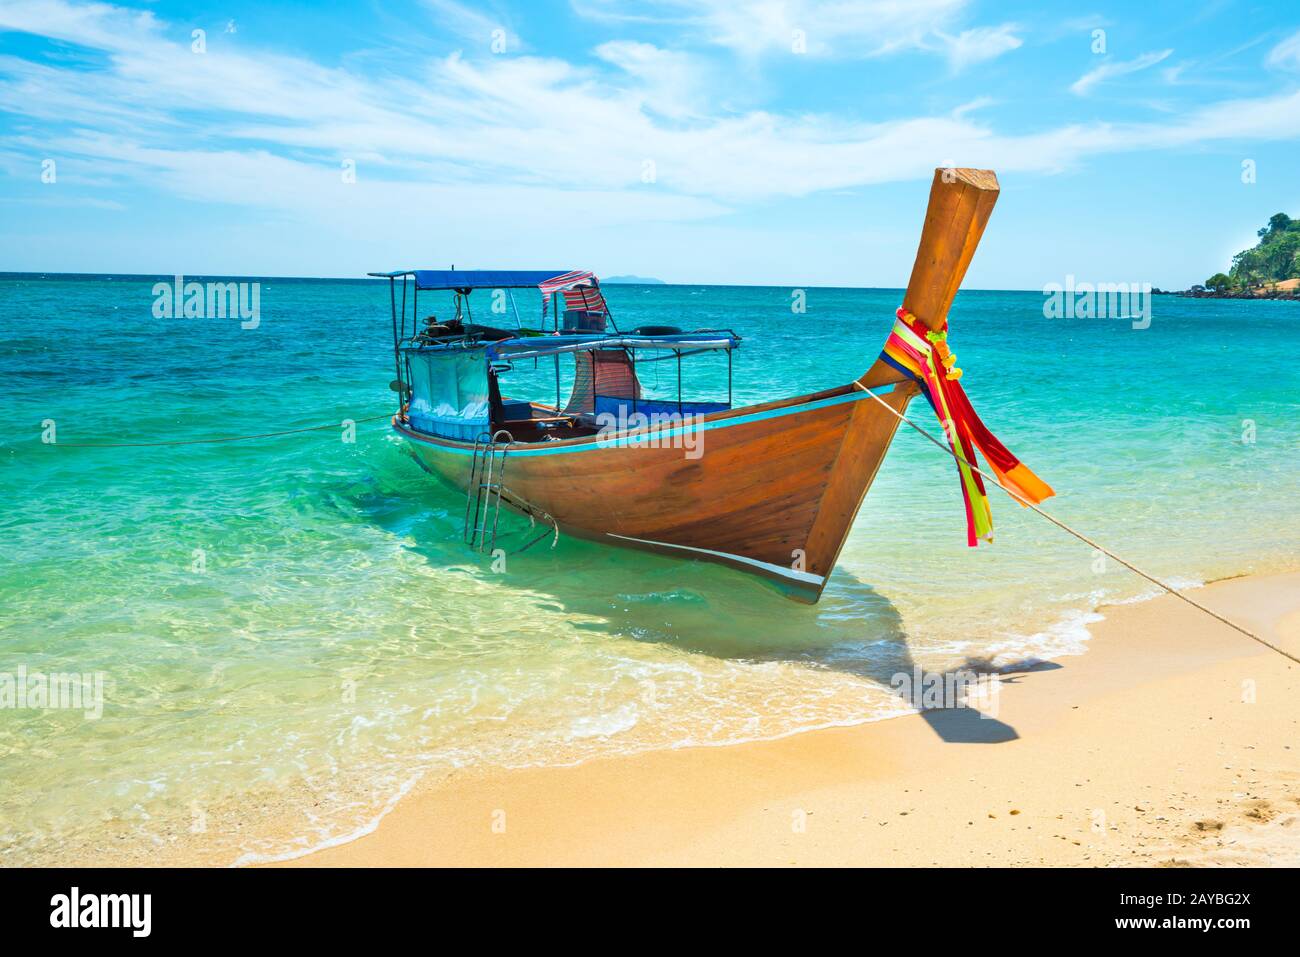 View of traditional thailand longtail boat at sand beach Stock Photo